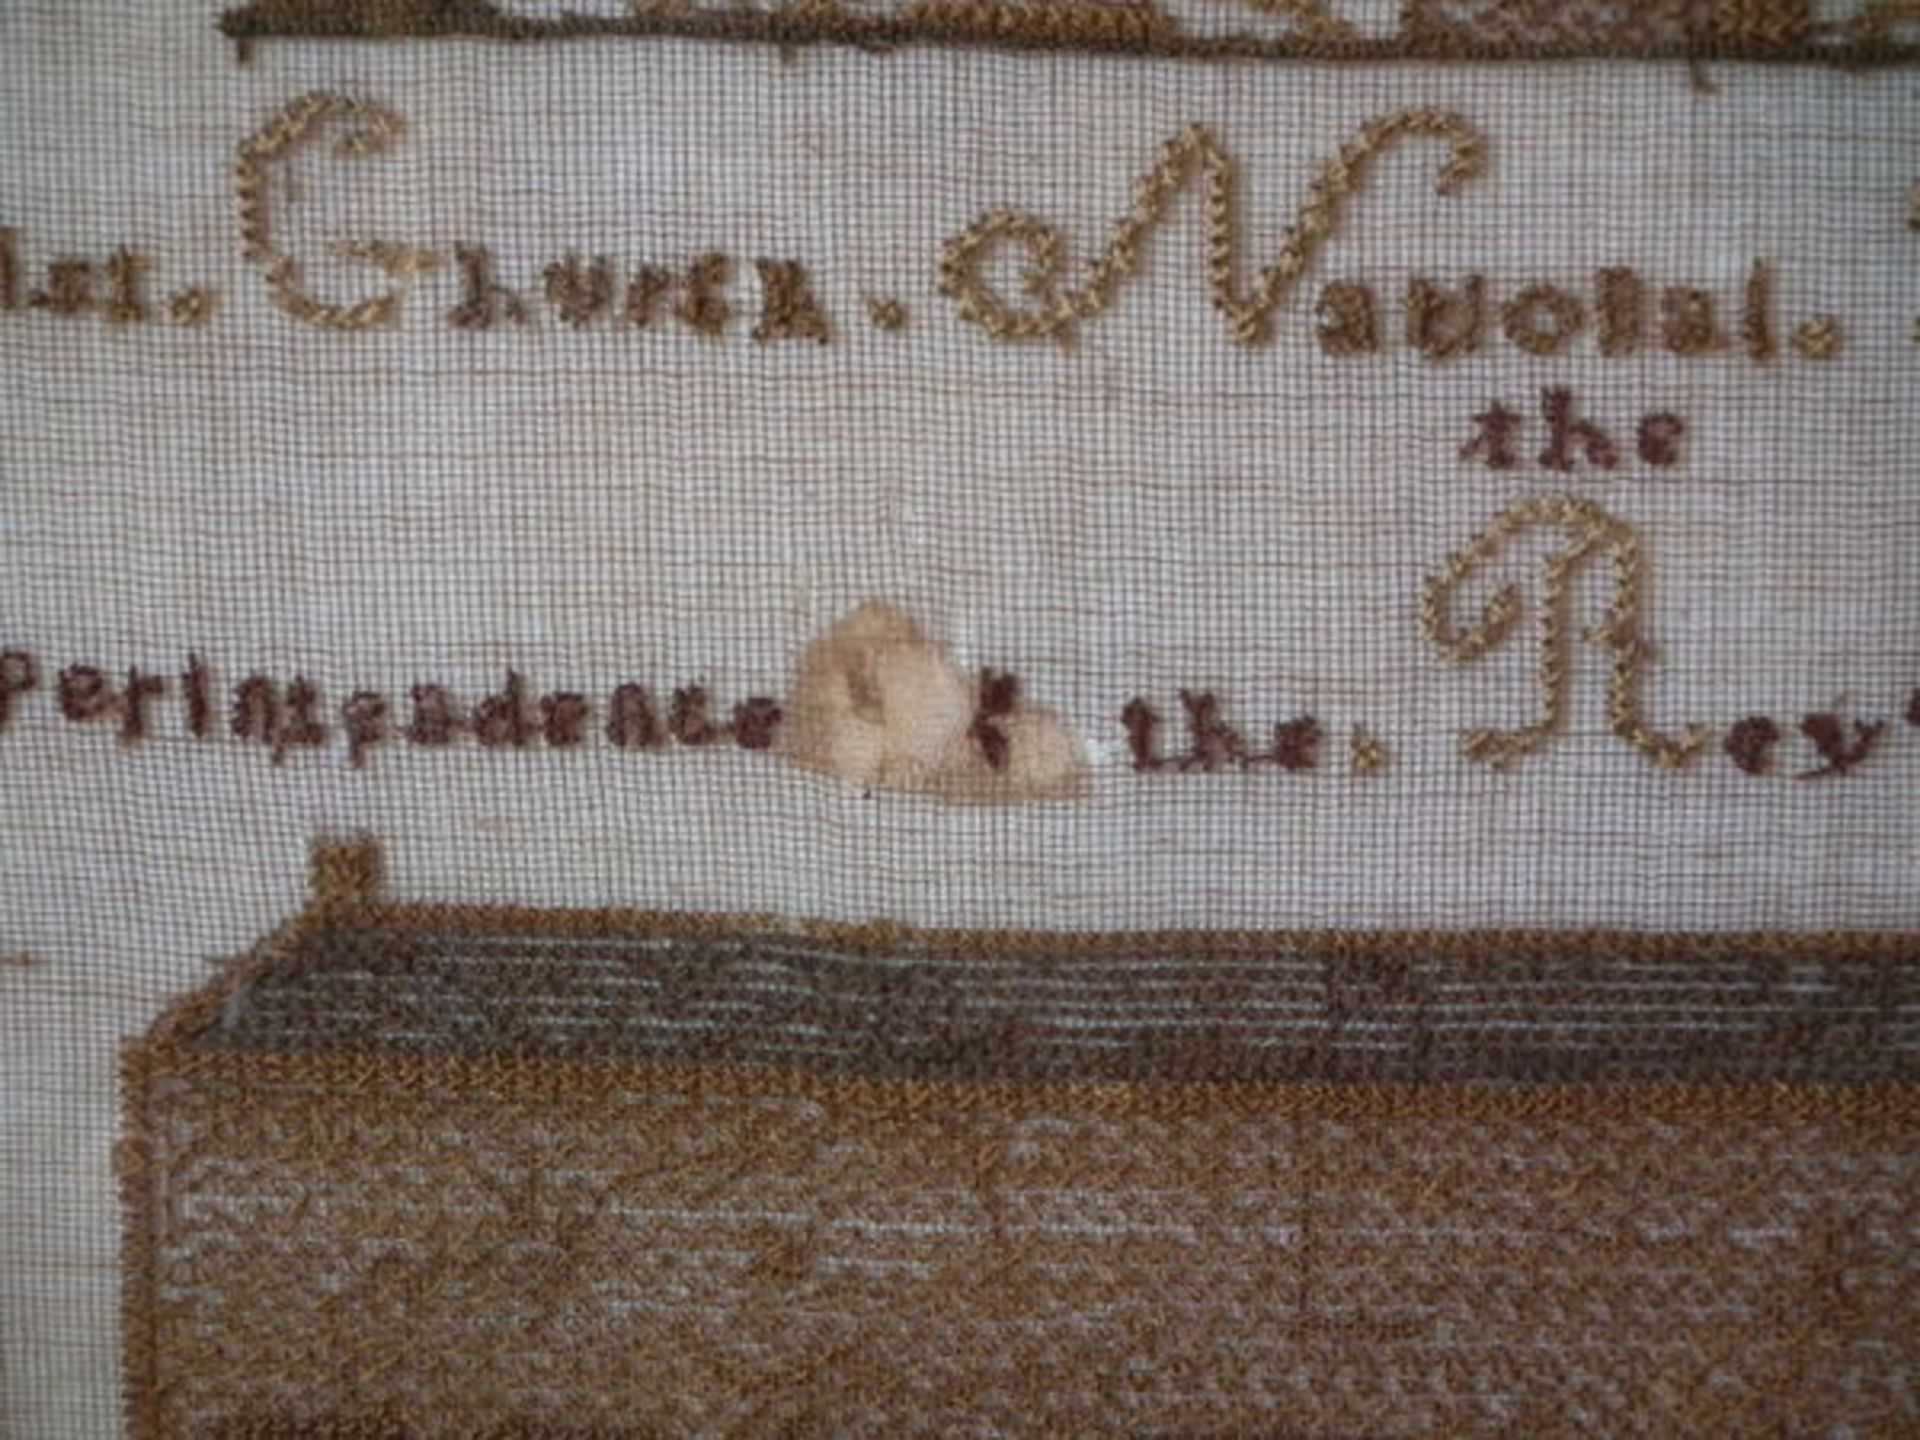 Needlework School Sampler dated 1843 by Sarah Bryan FREE UK DELIVERY - Image 14 of 38